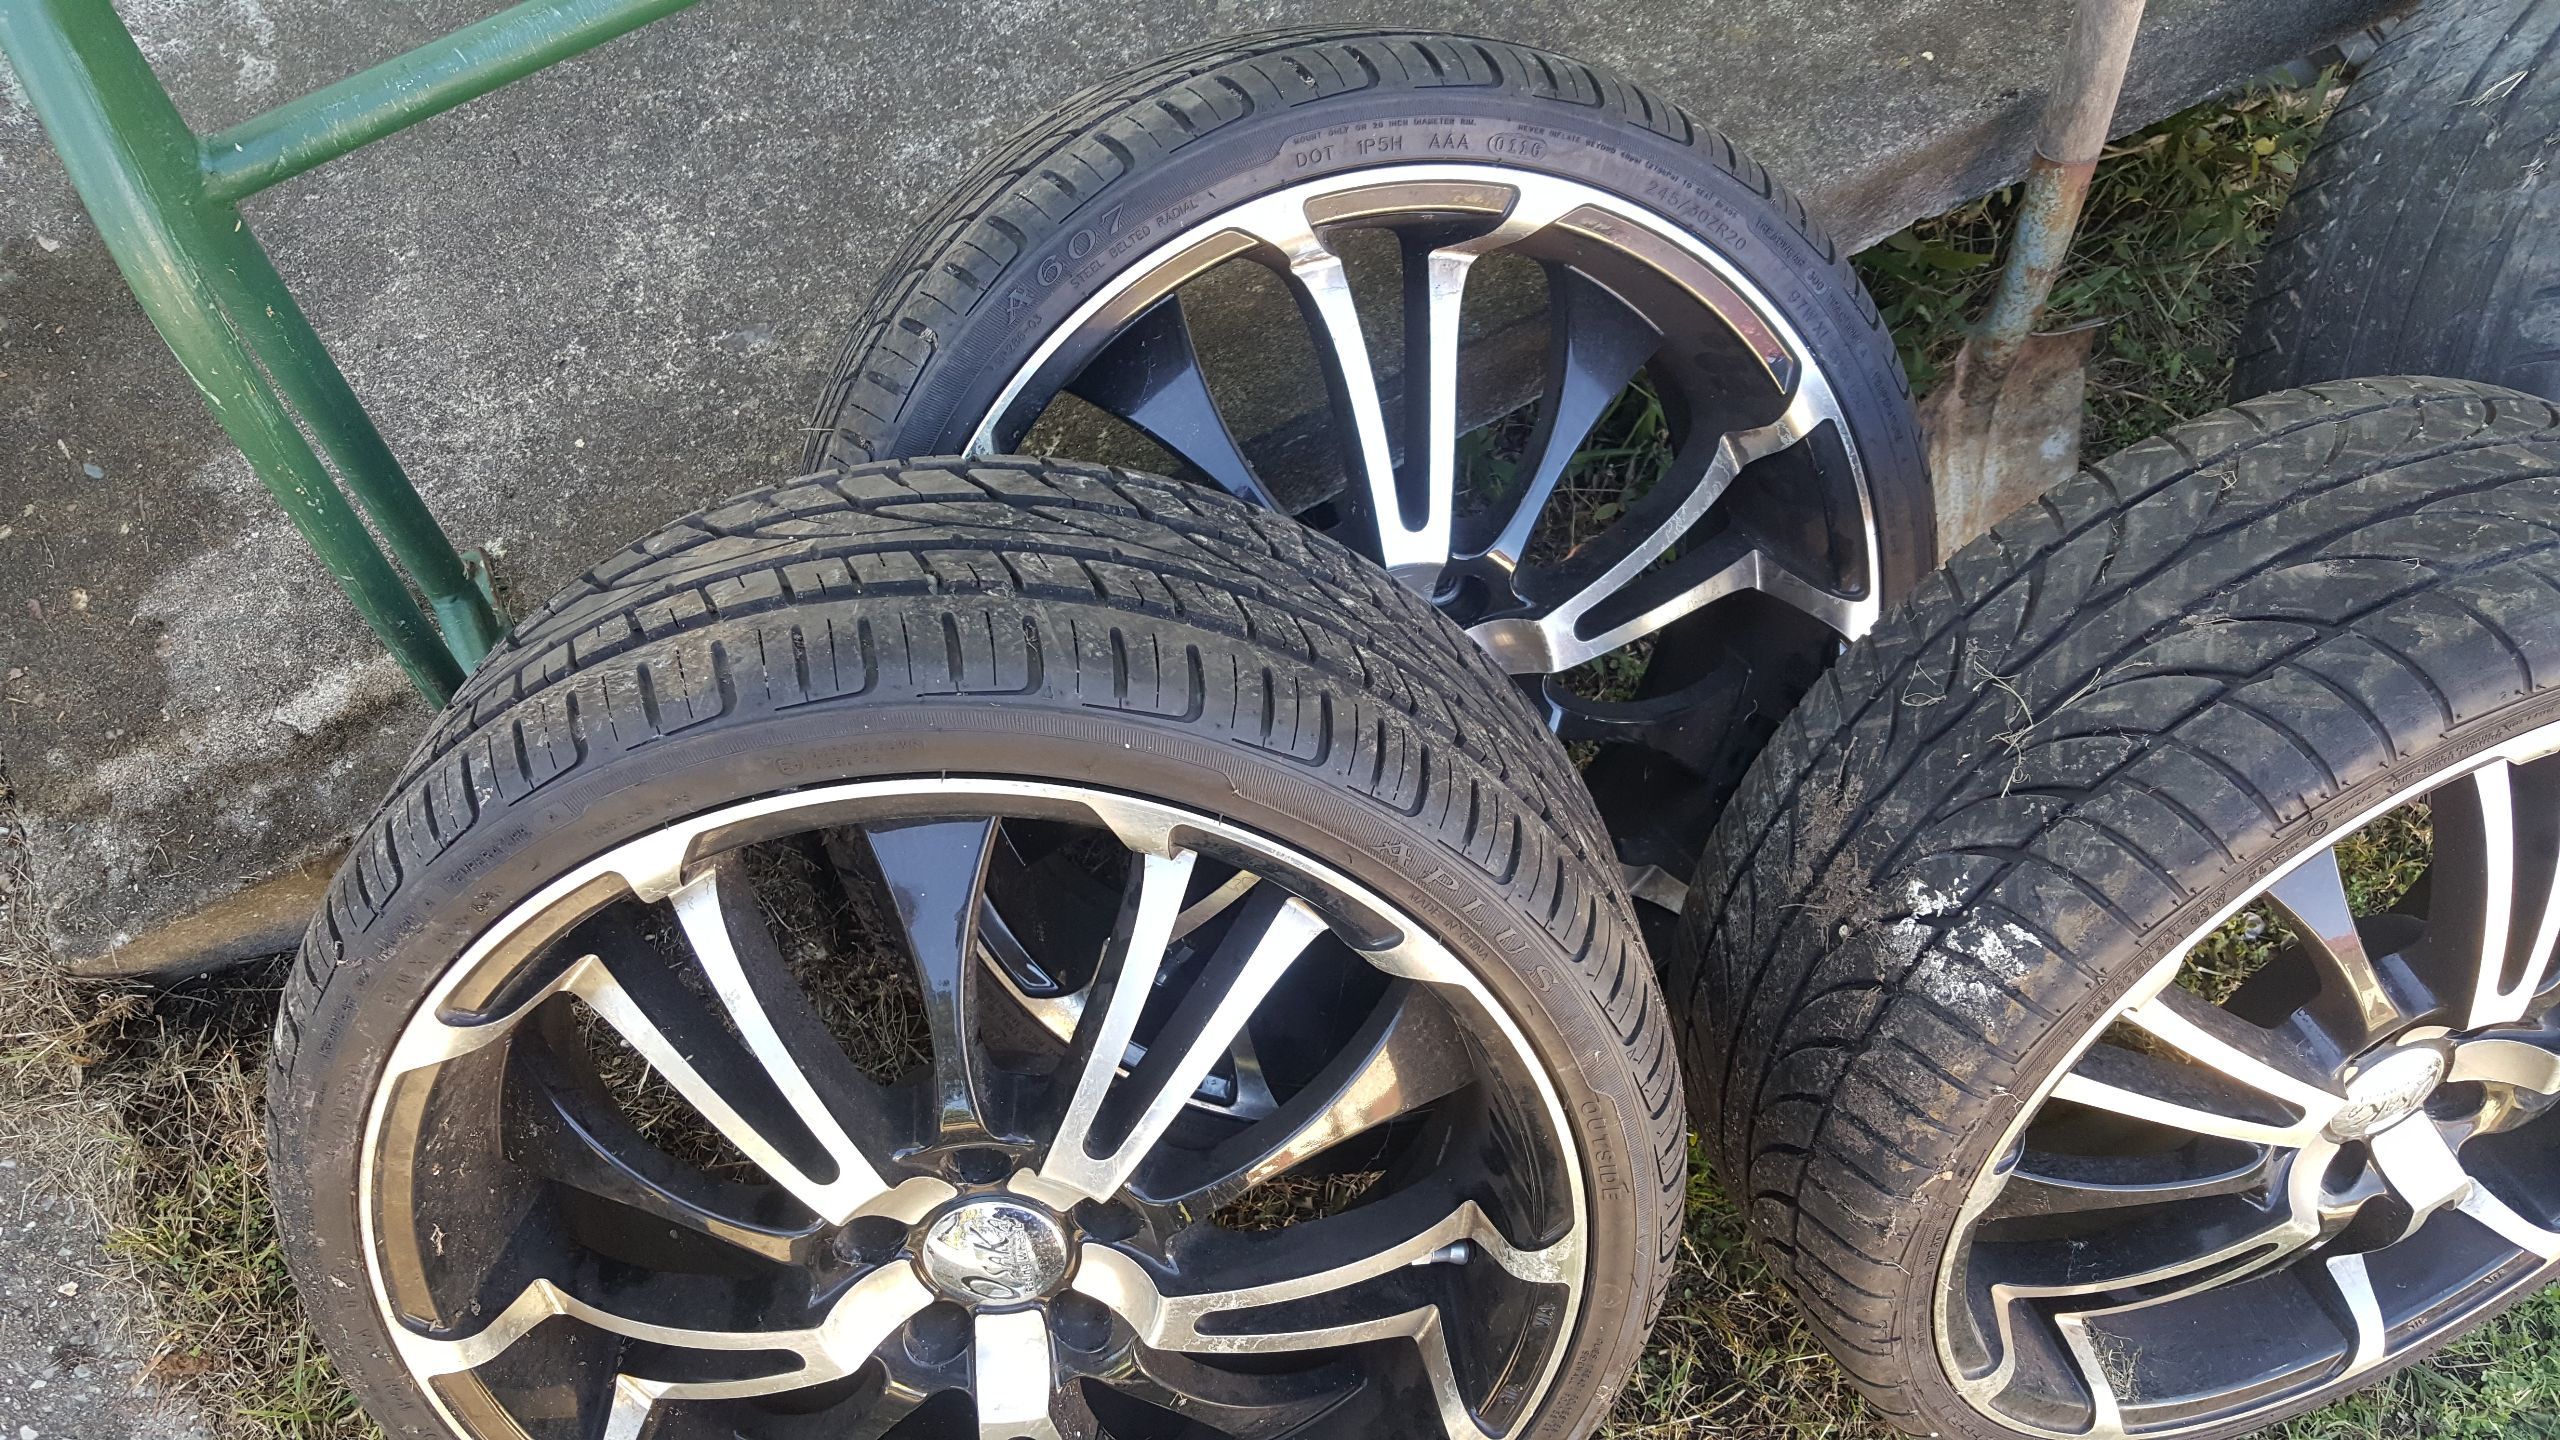 19 INCH Low Profile Tyres